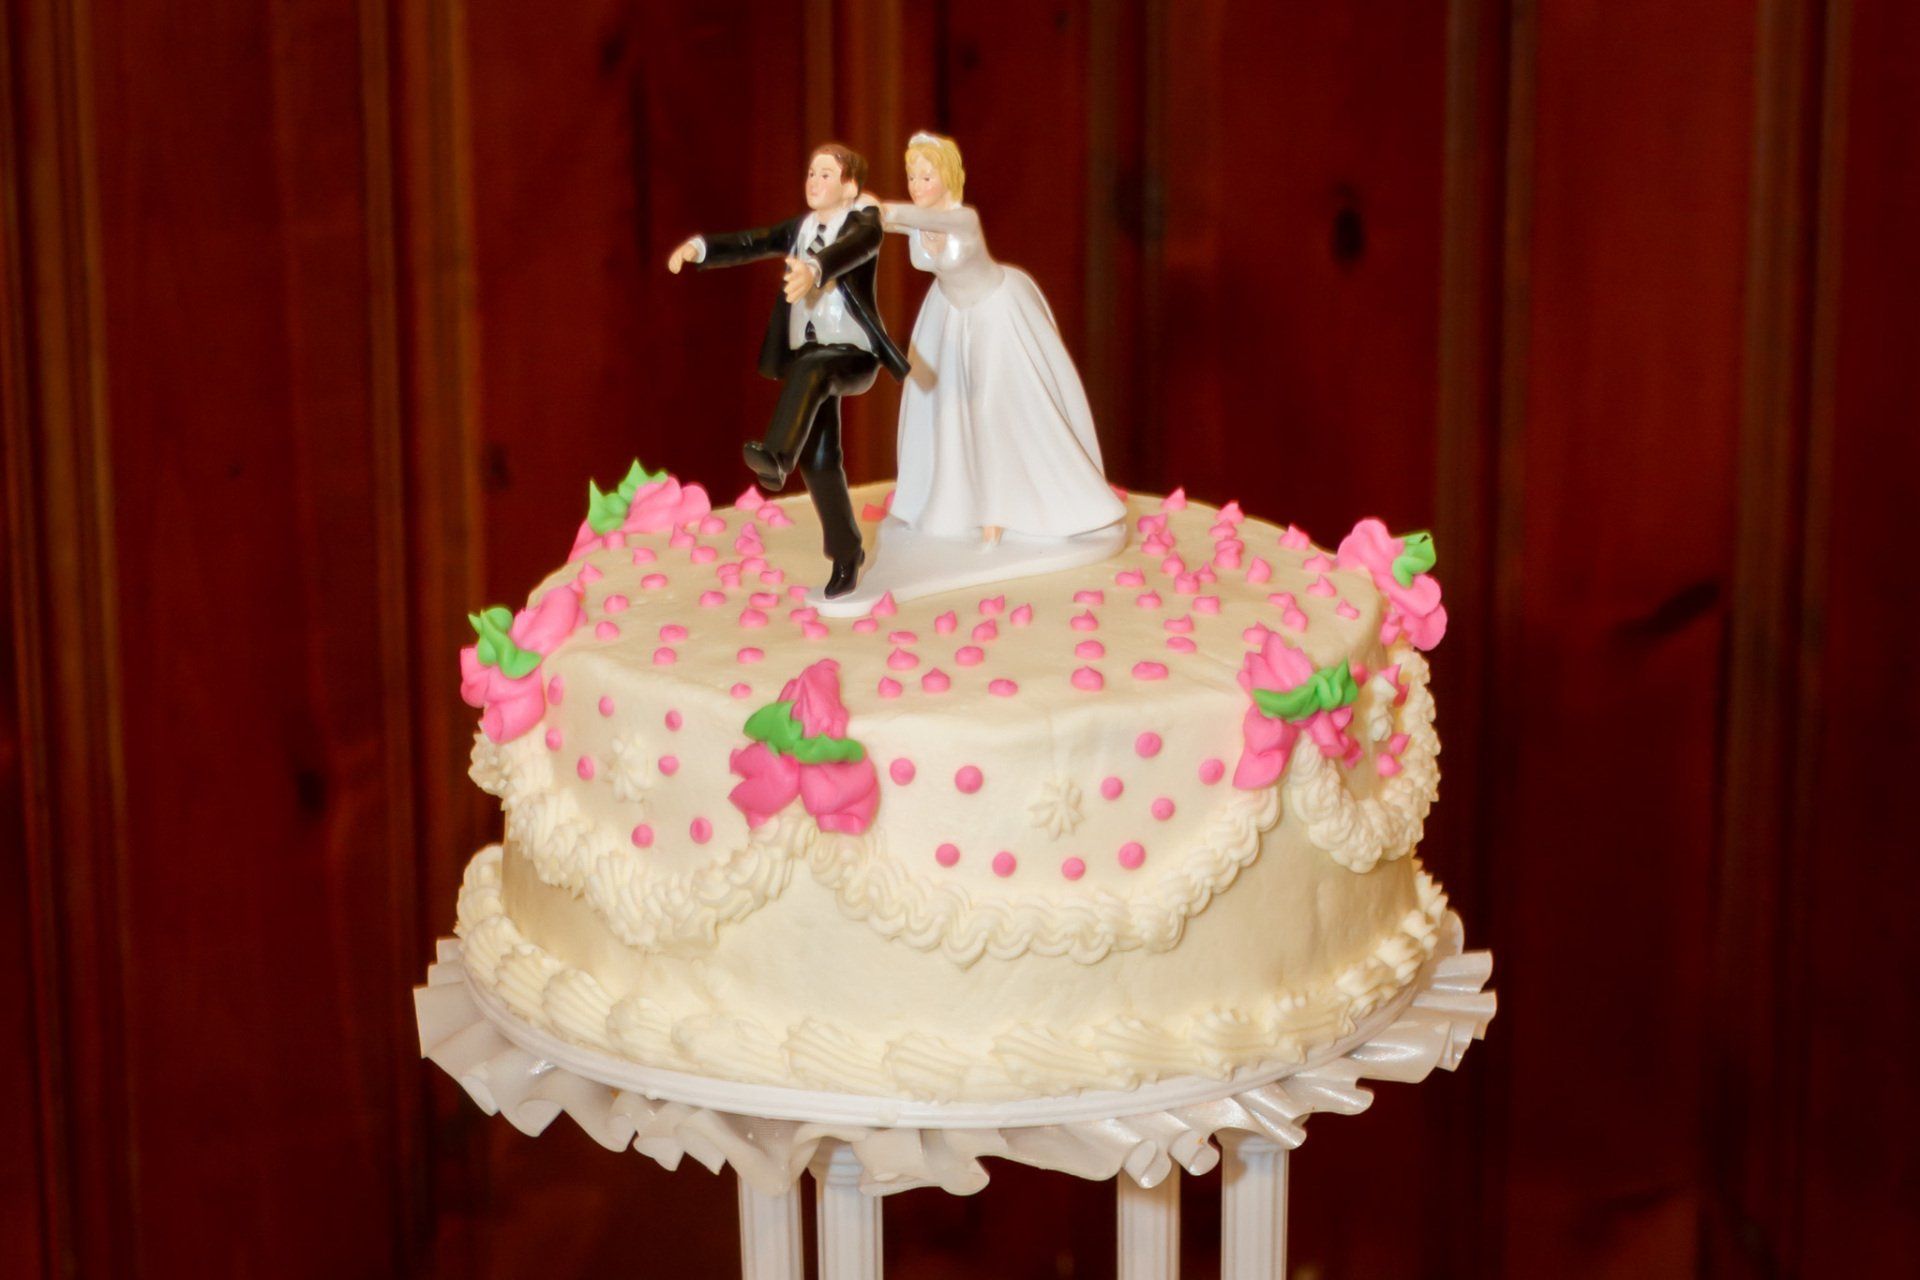 A picture of the comical wedding cake top showing a groom running away and a bride grabbing him by the collar